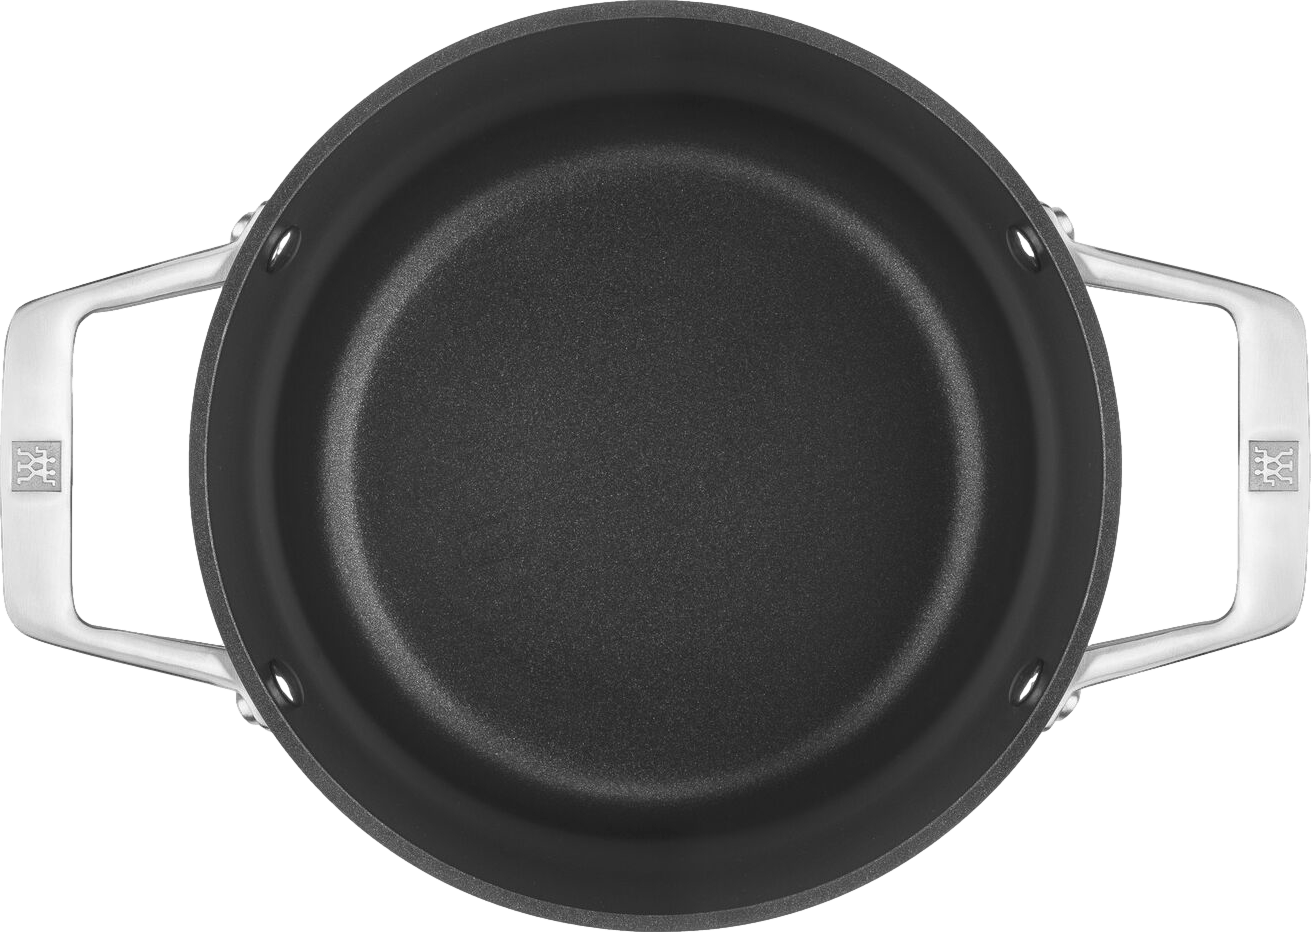 ZWILLING Motion 3-Qt. Non-Stick Hard-Anodized Saute Pan with Lid +